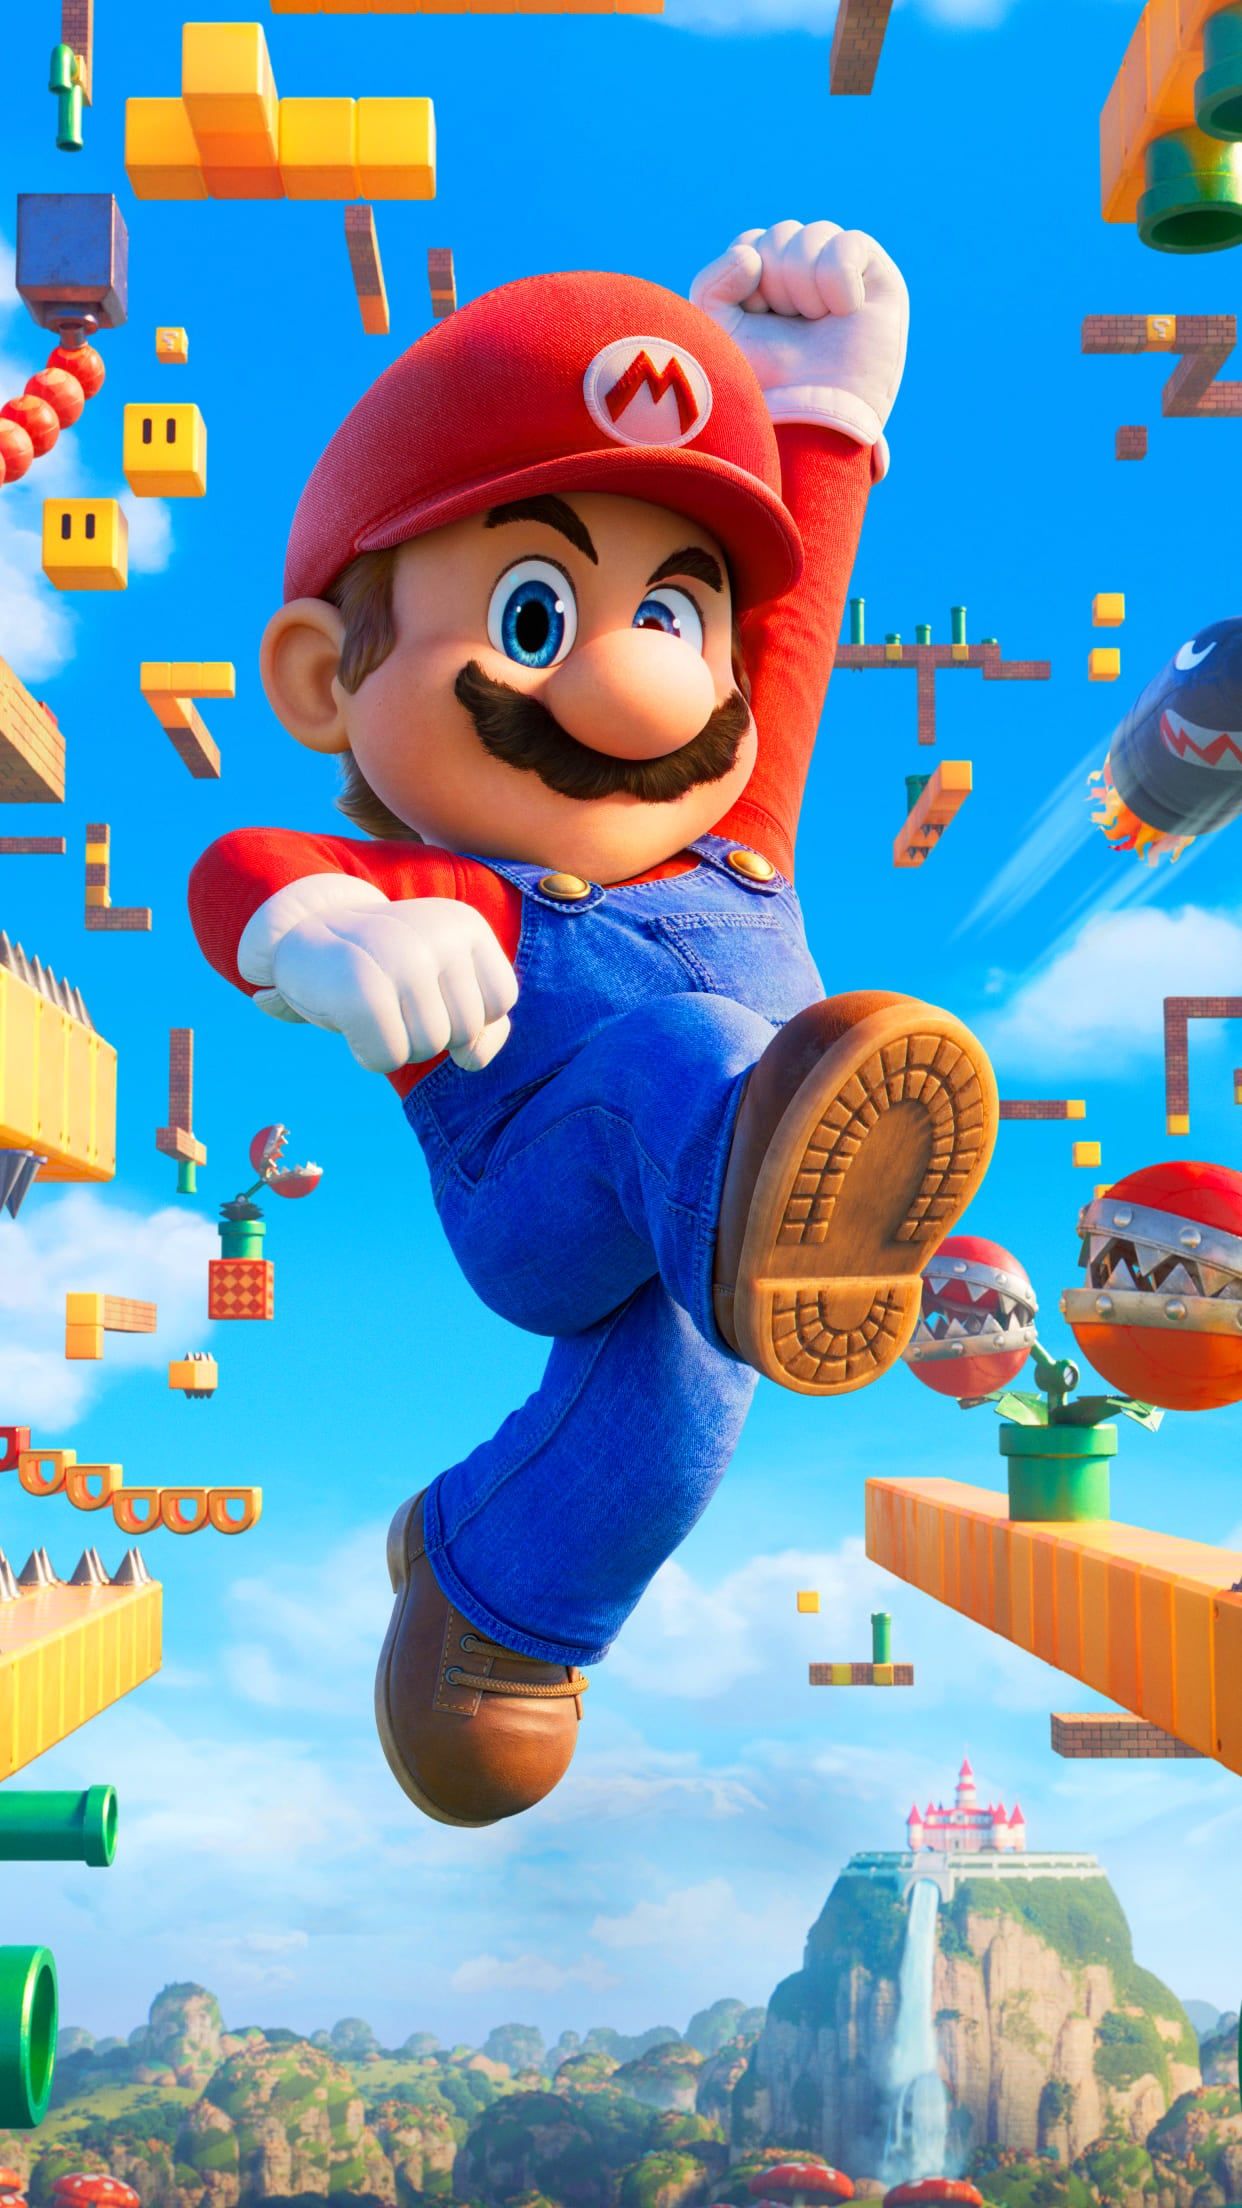 Mario jumping over a series of blocks in the new game - 